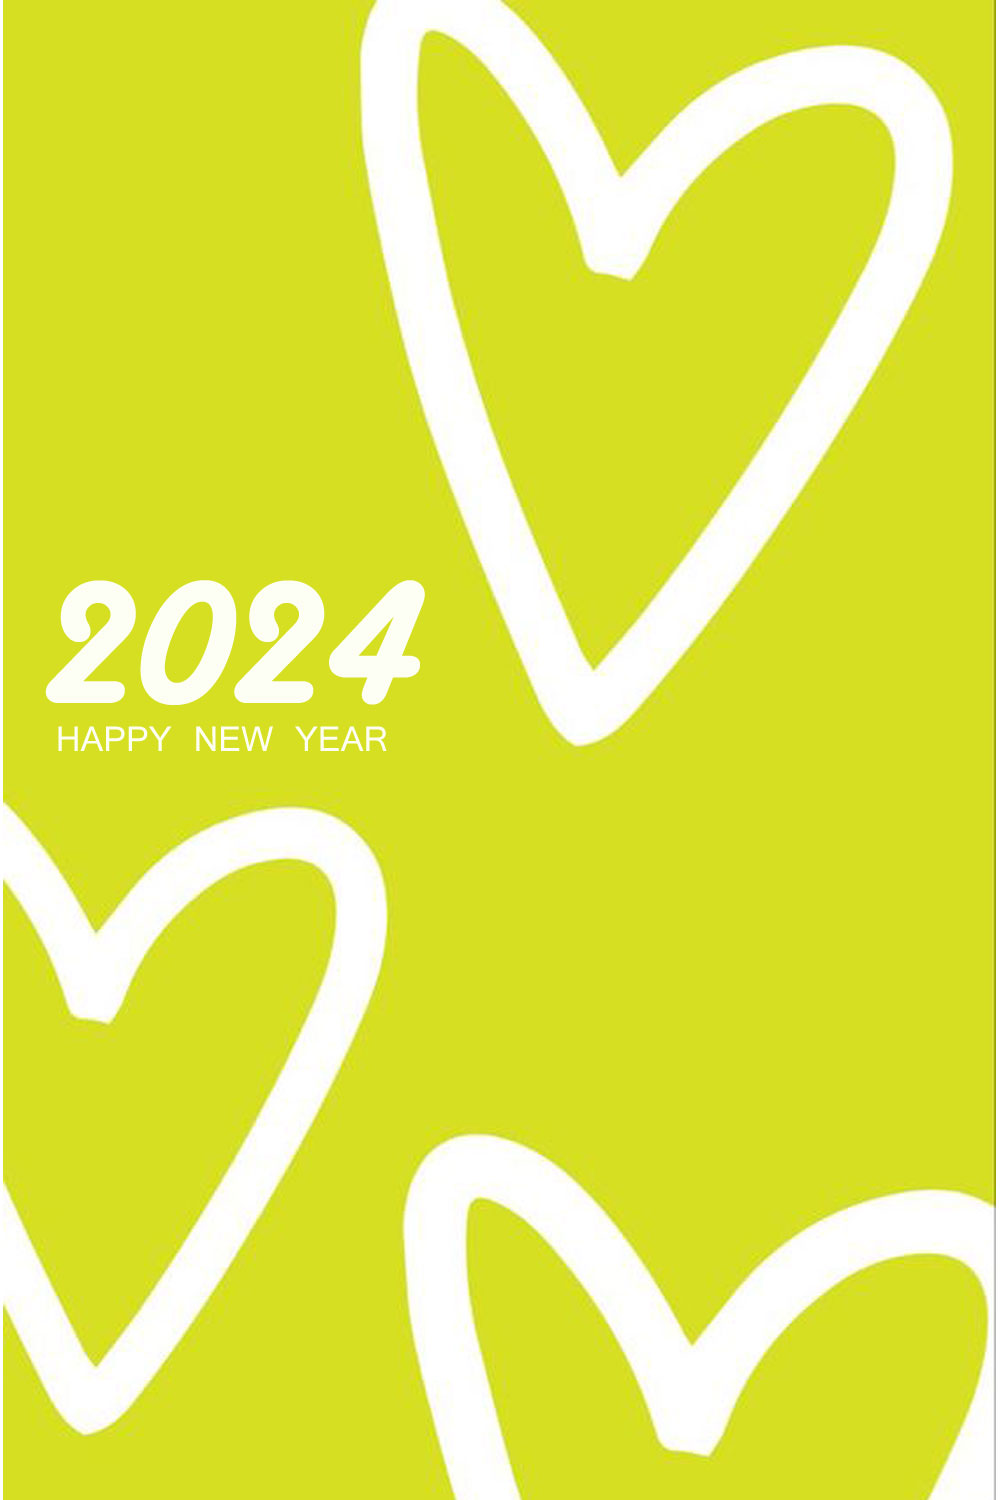 New Year 2024 Love You Wallpaper Birthday Wishes, Memes, SMS & Greeting eCard Image